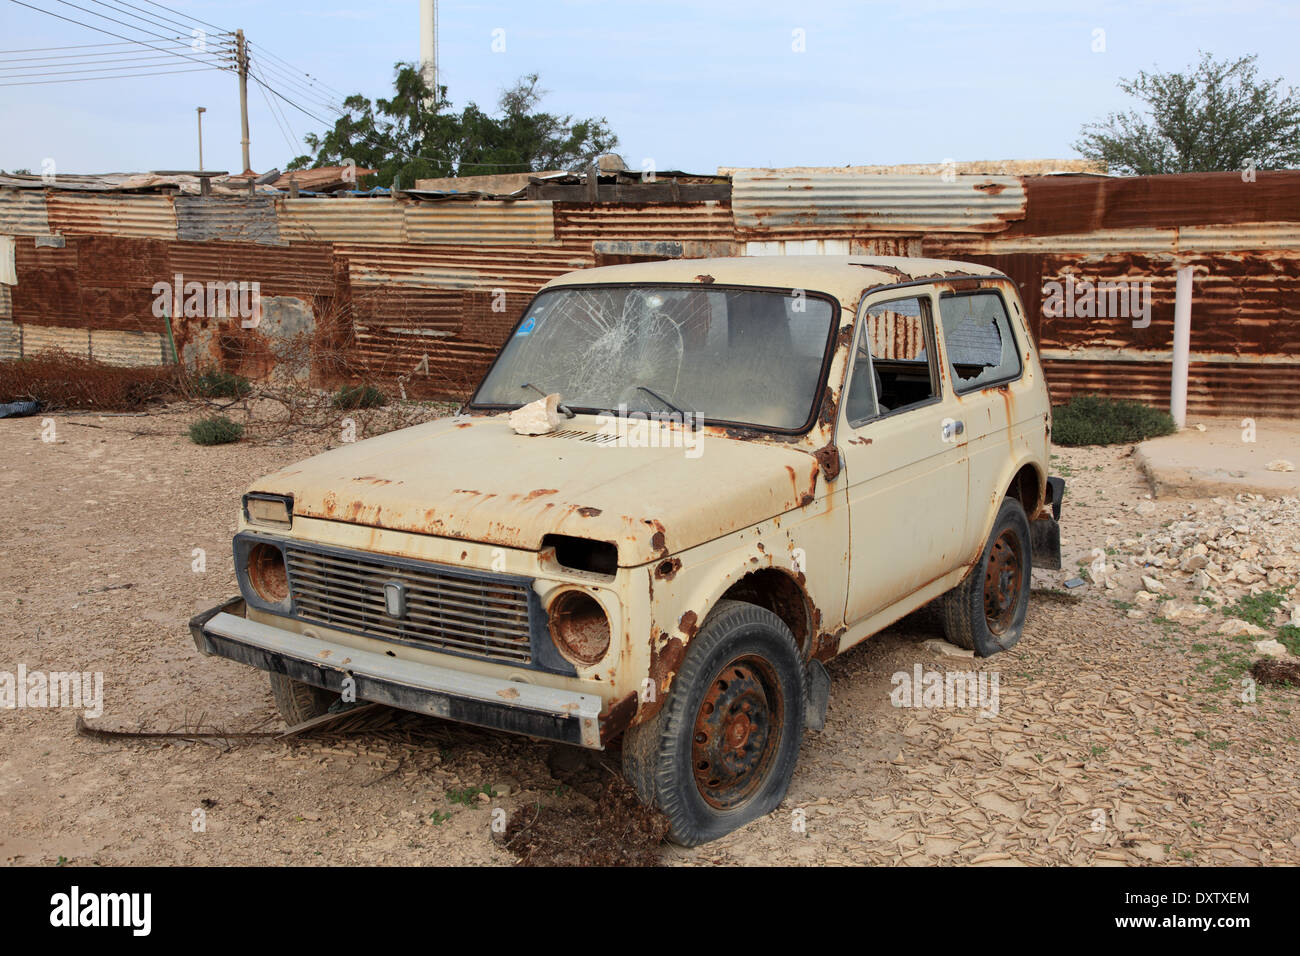 Lada Niva car wreck in Qatar, Middle East Stock Photo